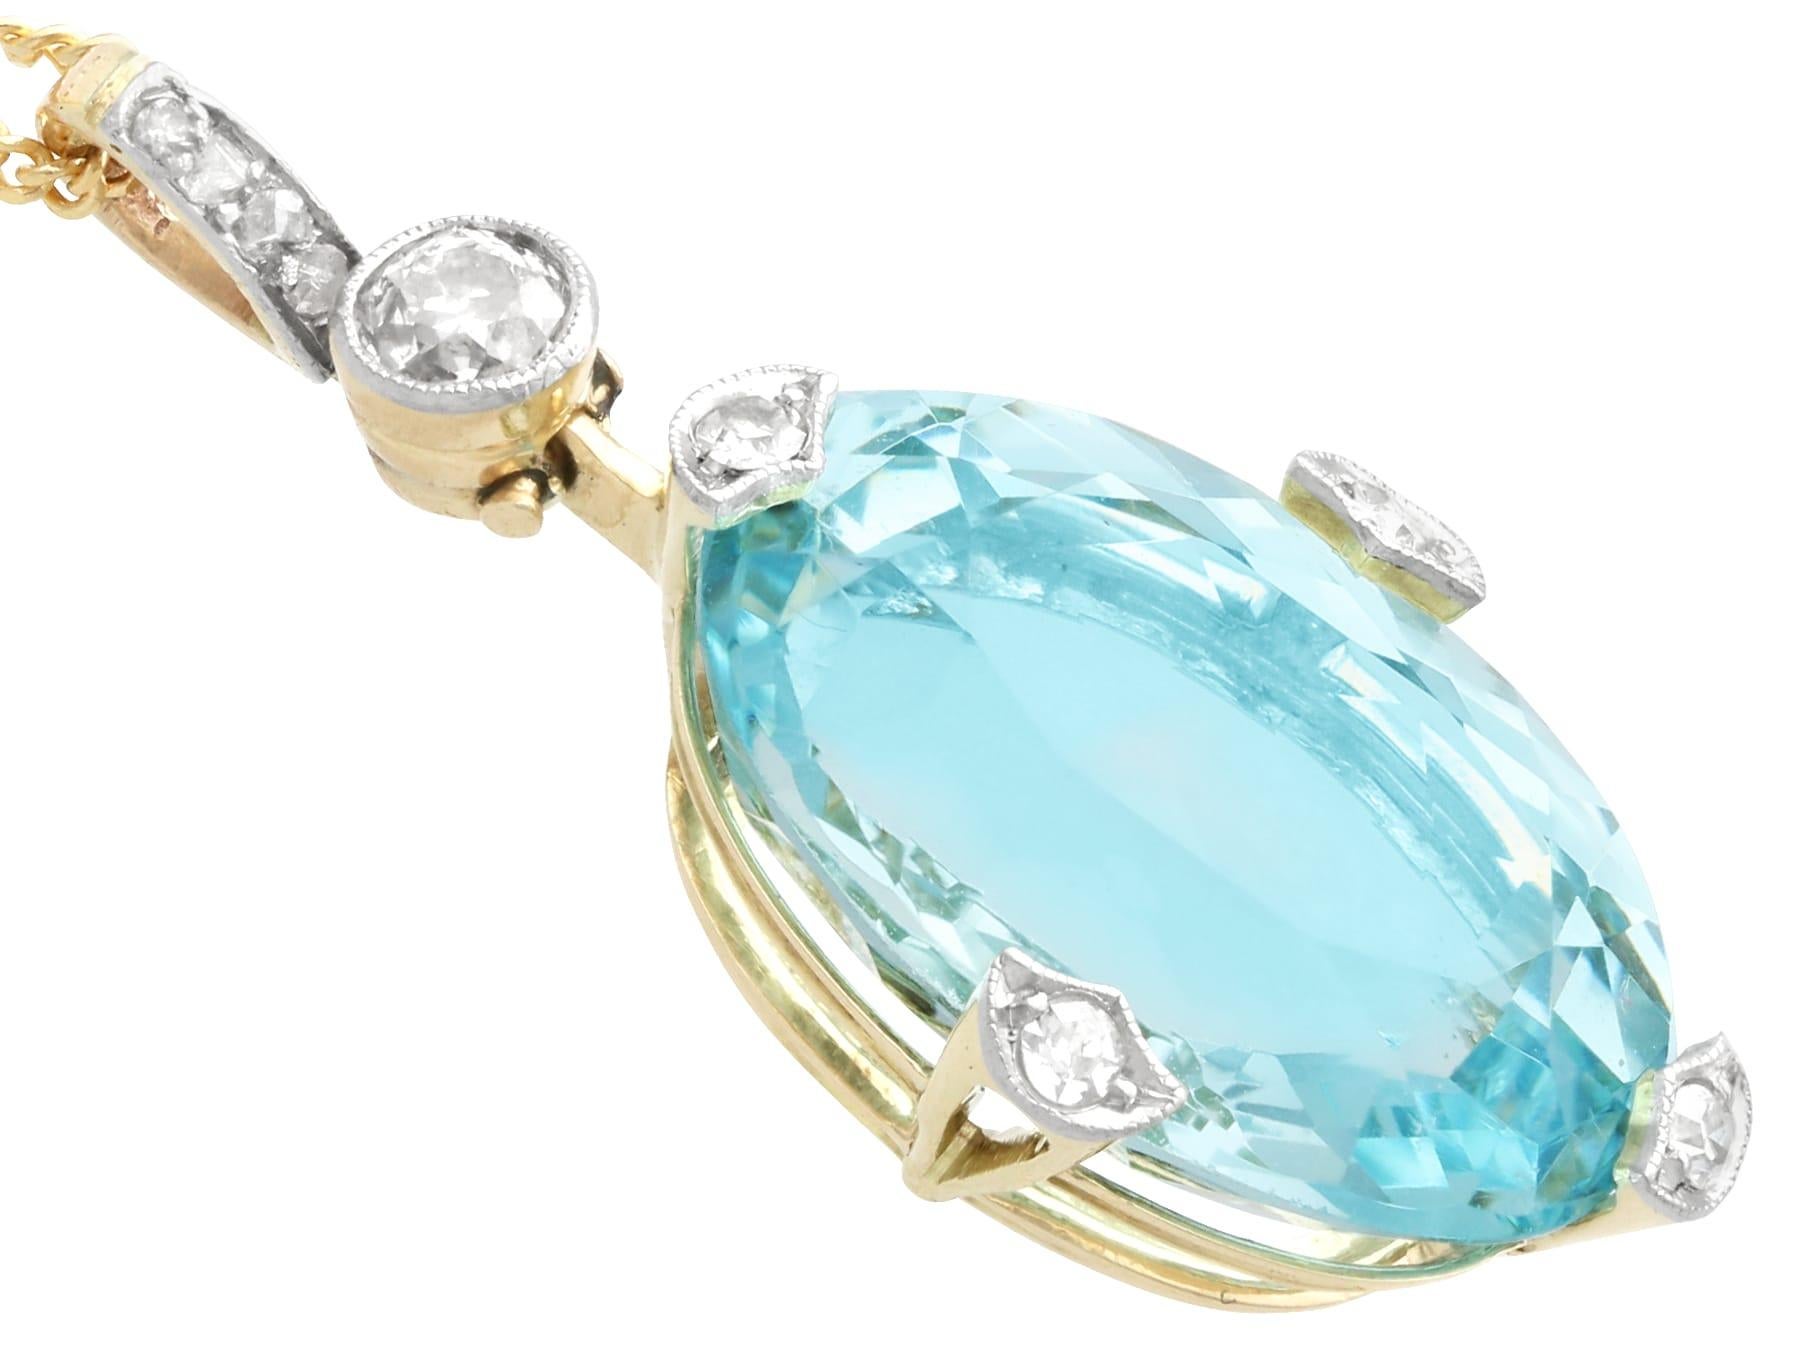 Antique 5.17 Carat Aquamarine 0.36 Carat Diamond and 14k Yellow Gold Pendant In Excellent Condition For Sale In Jesmond, Newcastle Upon Tyne